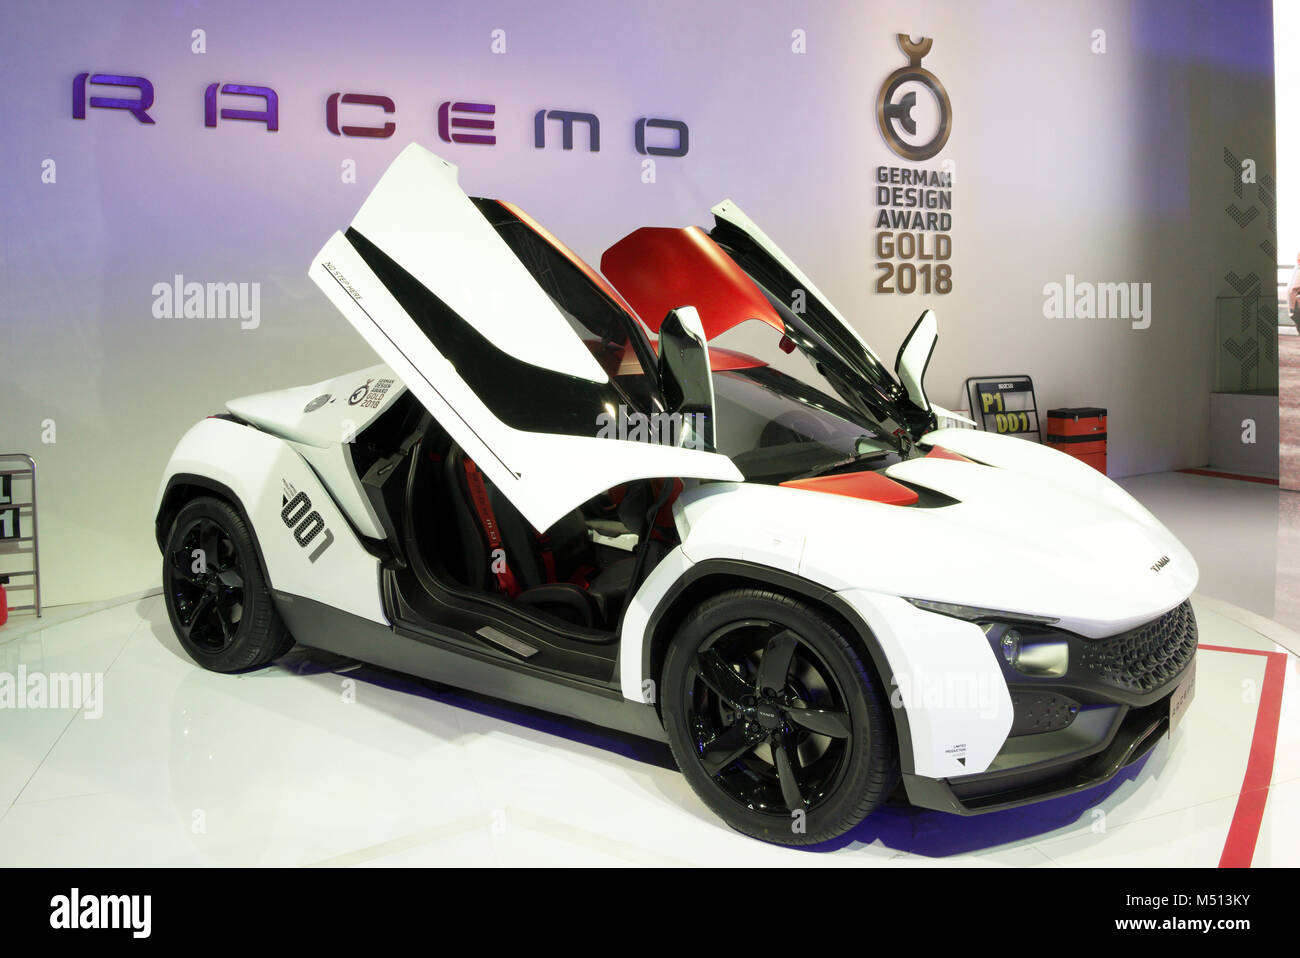 Greater Noida, India. 14th February 2018. Tata Motors showcase their Racemo sports coupe at Auto Expo 2018 in Greater Noida, India. Stock Photo